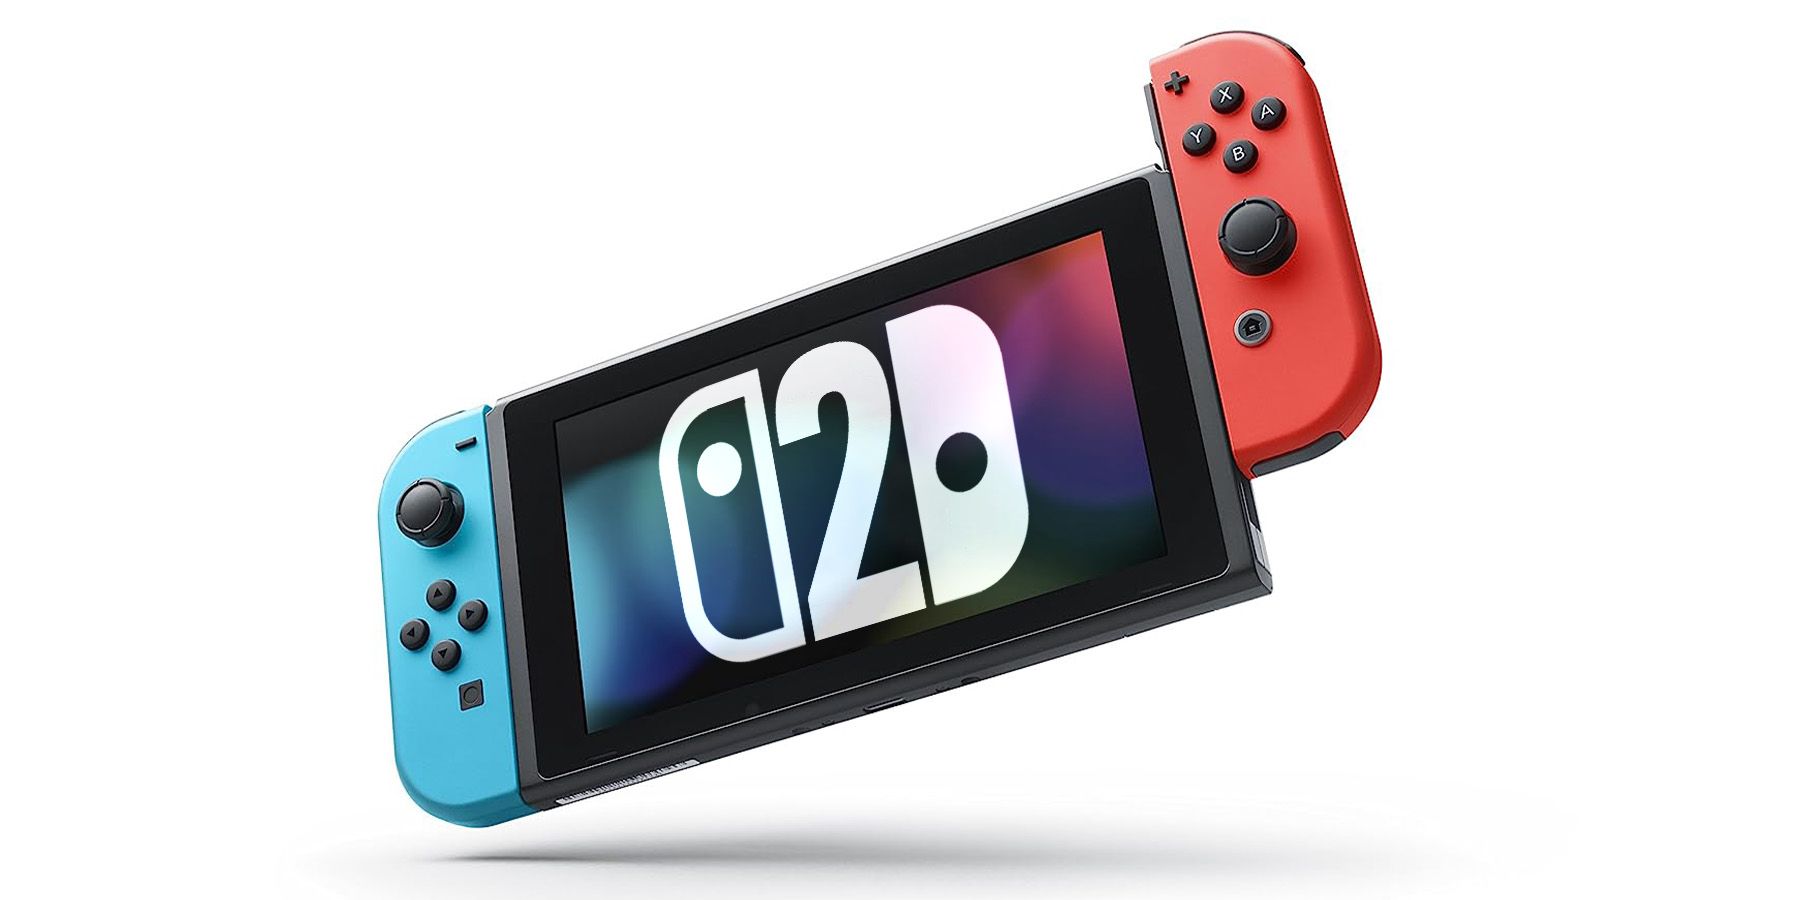 Neon Blue and Red Nintendo Switch displaying Switch 2 logo mockup on white background